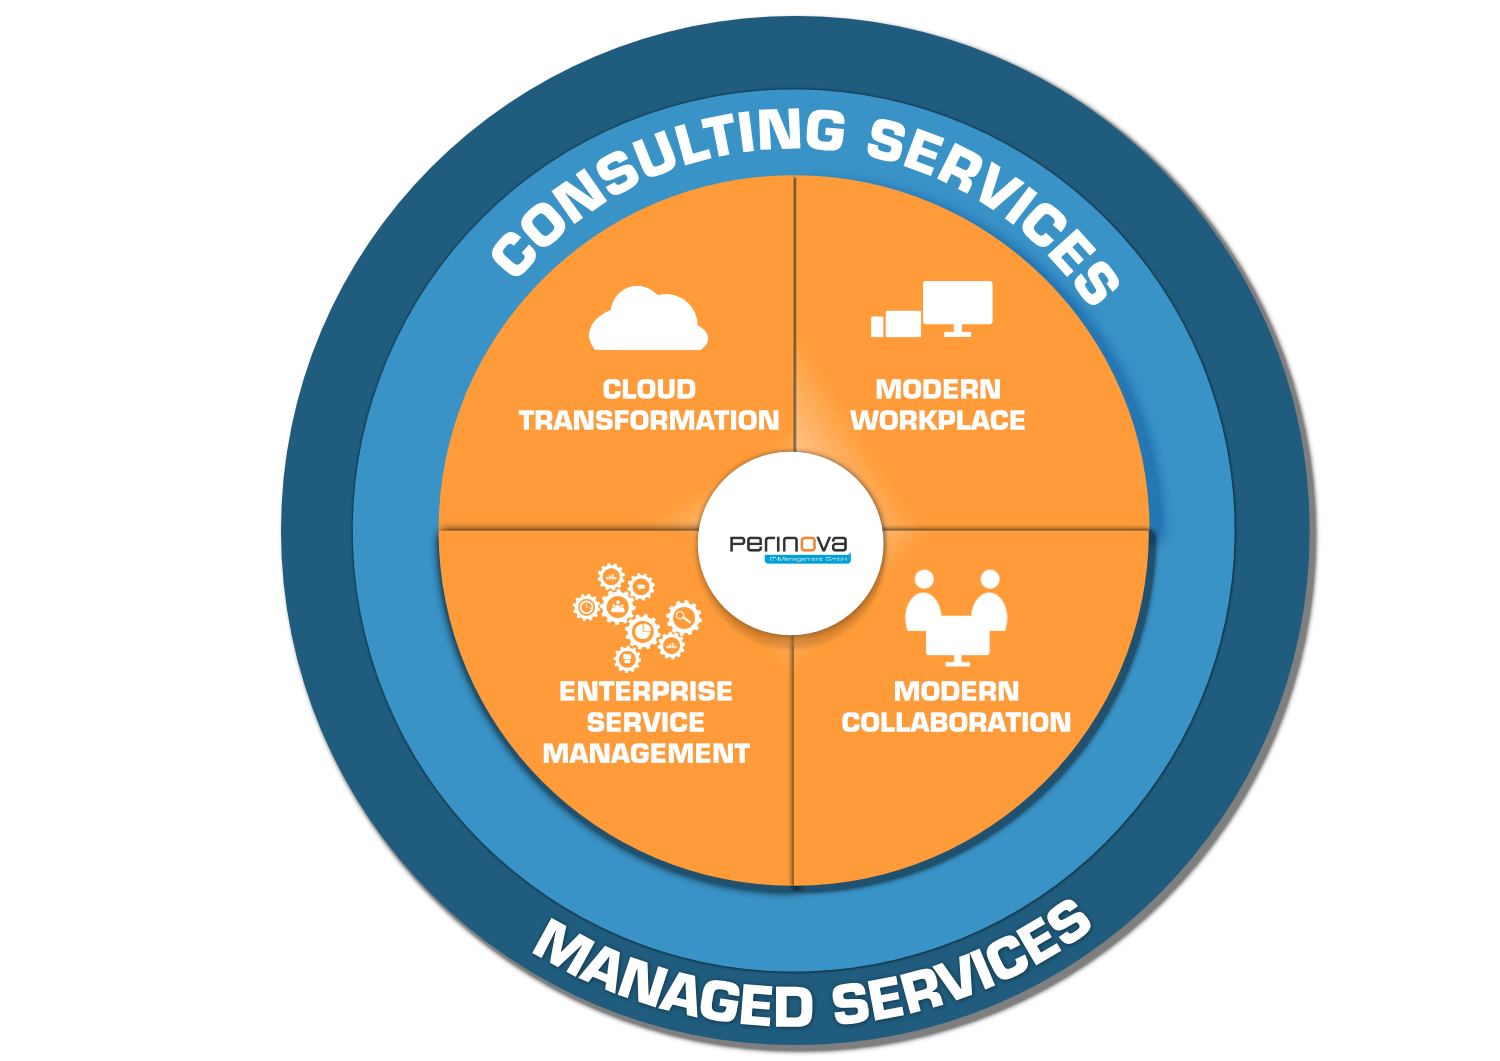 perinova: Consulting Services, Managed Services, Cloud Transformation, Modern Workplace, Enterprise Service Management, Modern Collaboration